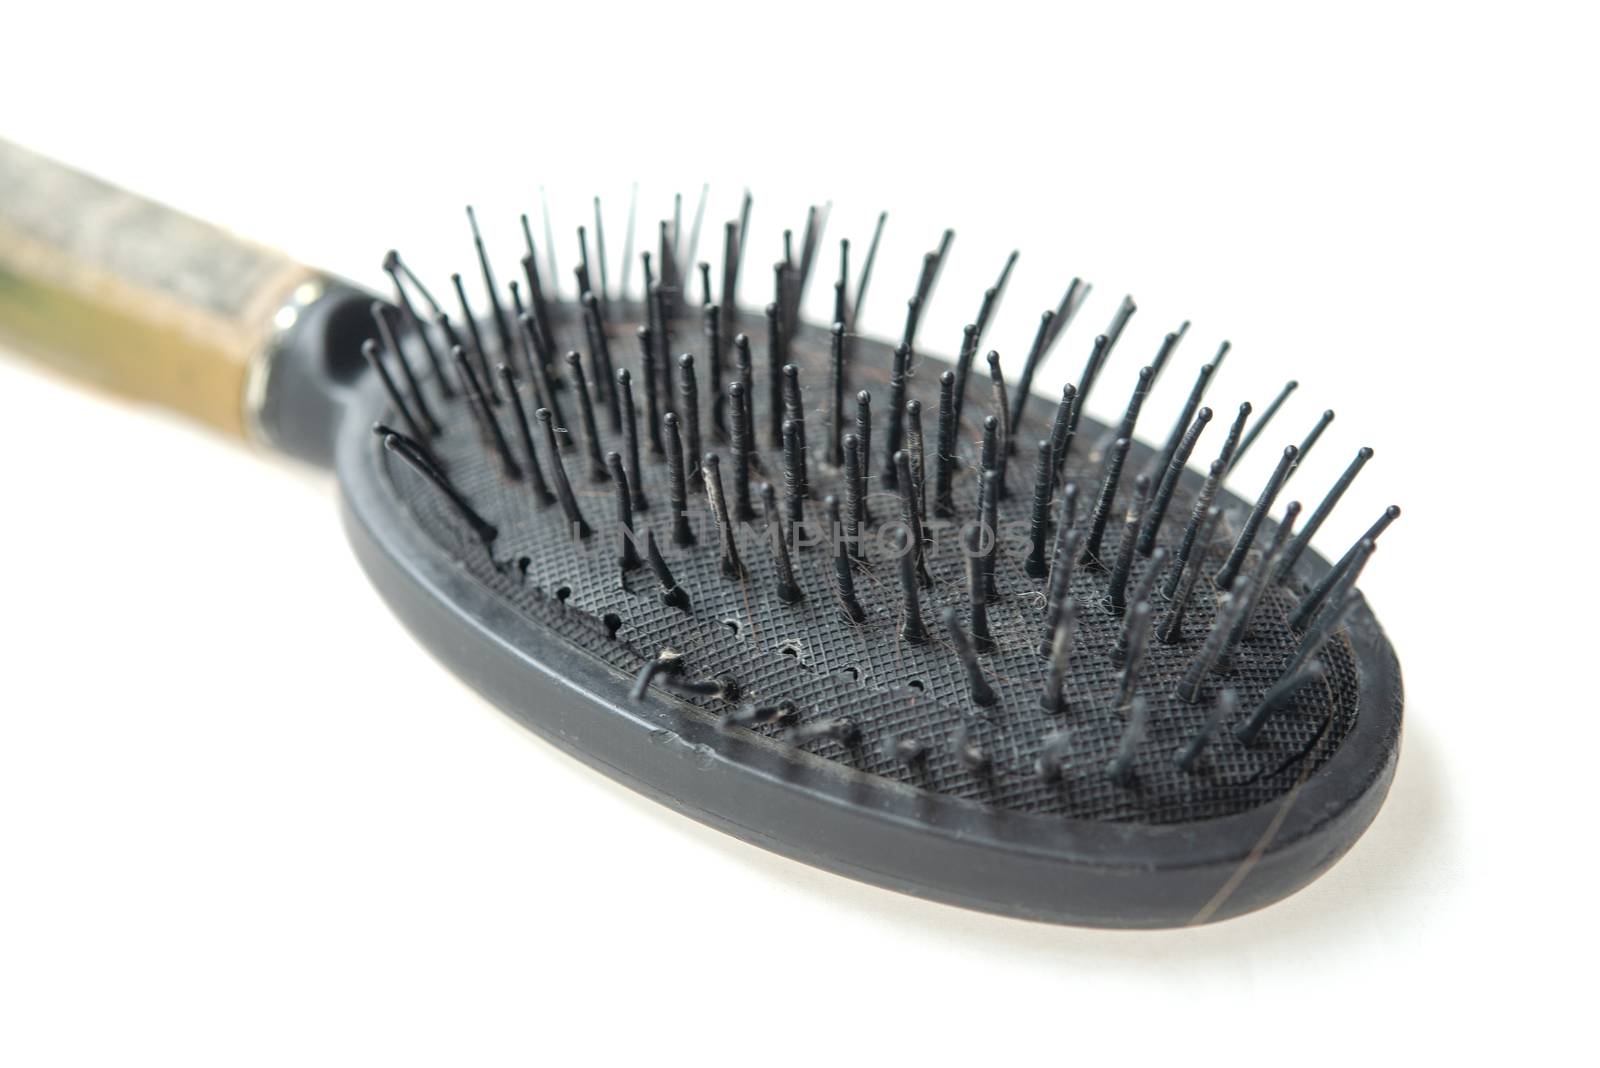 Used old dirty hair brush isolated on white background.